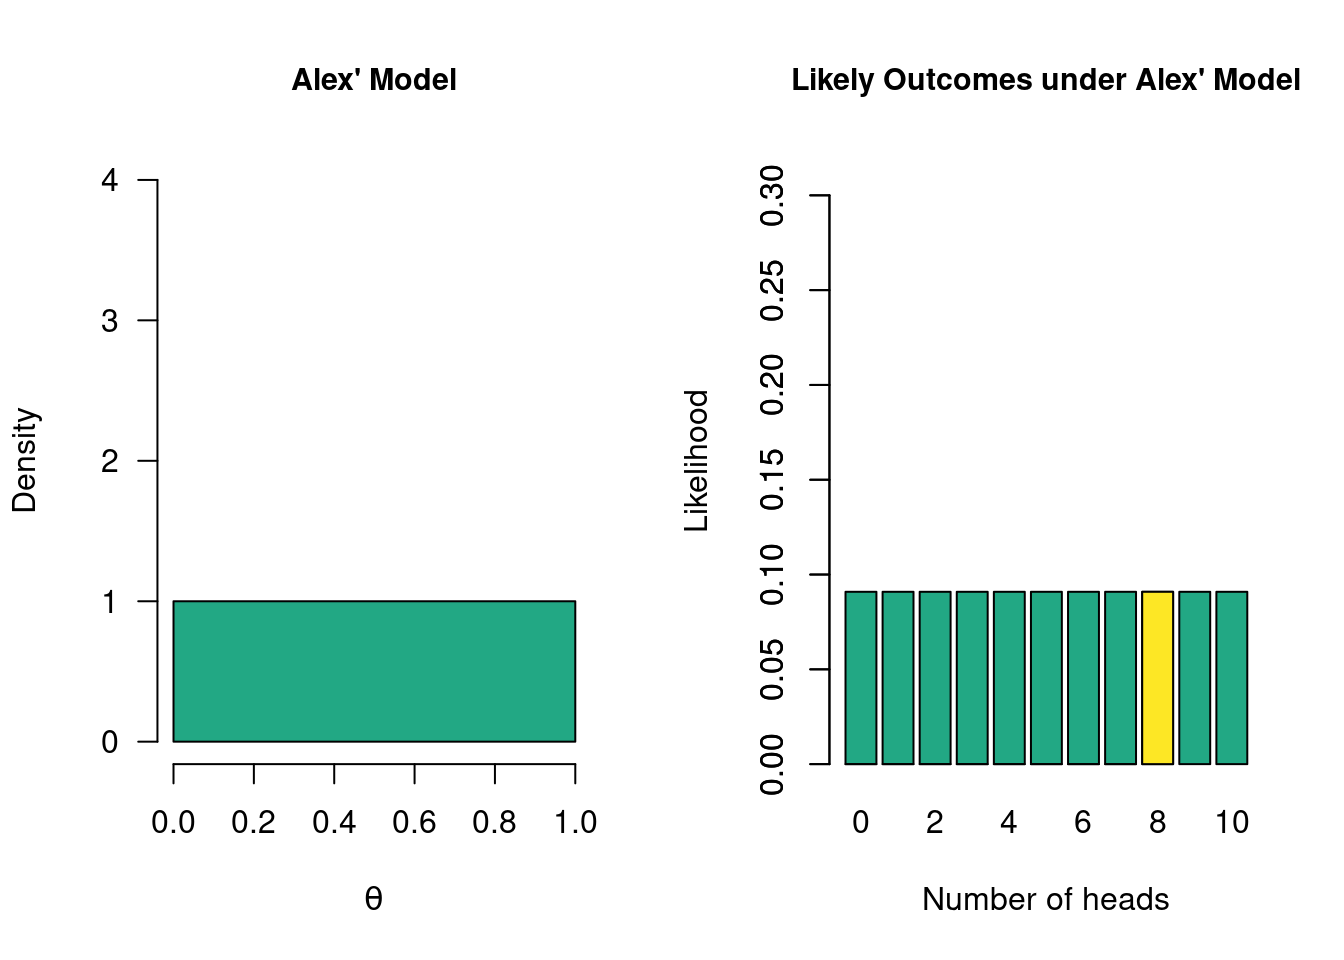 The so-called "uninformed model". Alex wants to keep an open mind about the values of theta and considers each value equally plausible. Left: the colored region indicate what Alex believes. Right: what this specific model considers likely outcomes. The yellow bar indicates the marginal likelihood of the observed data (8 heads).